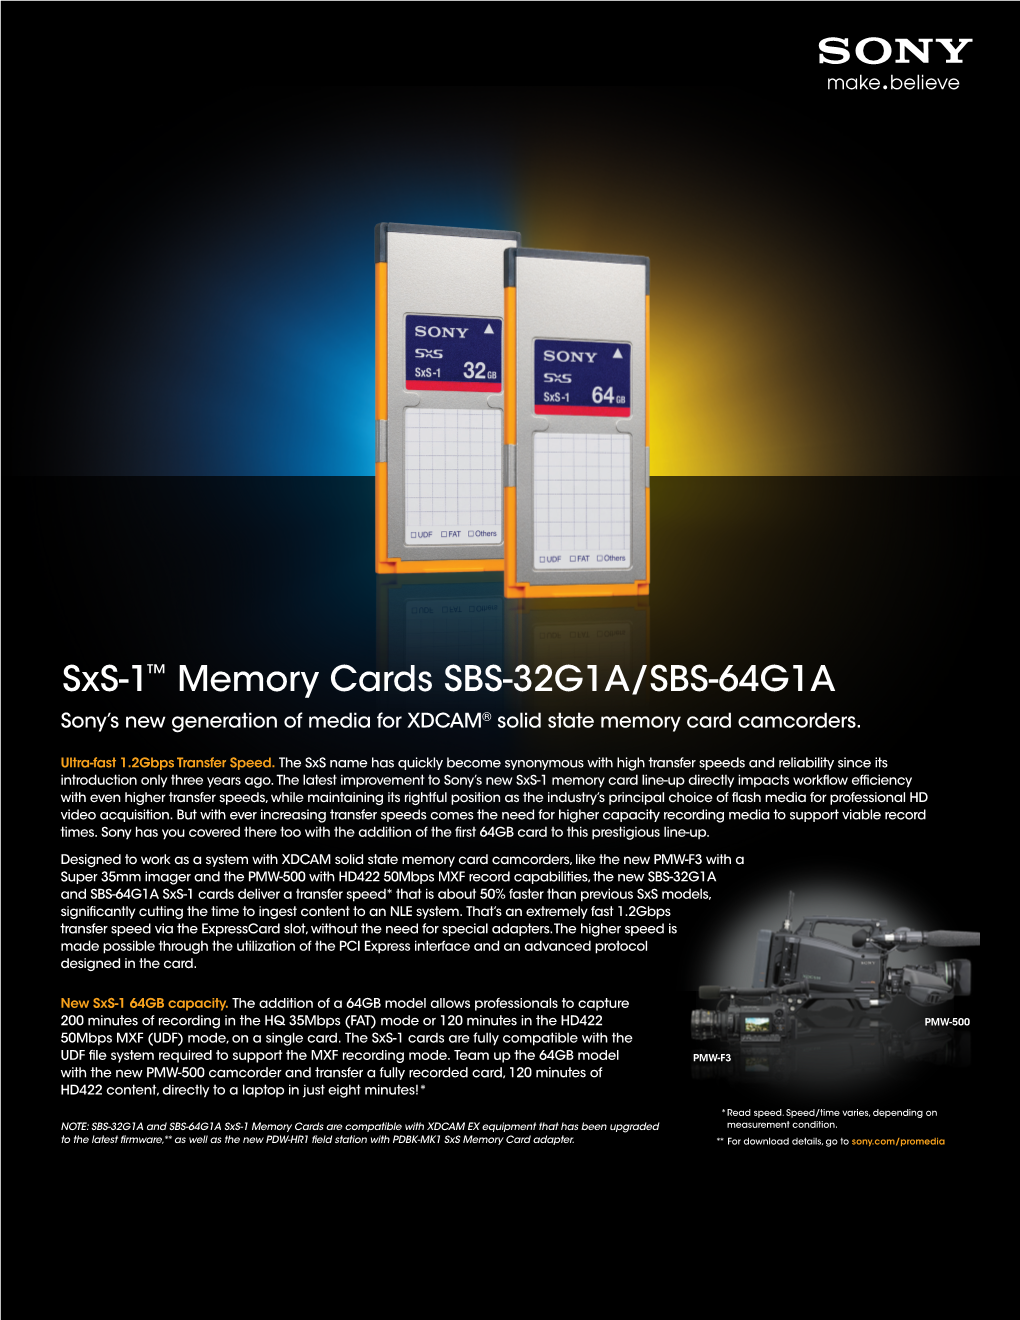 Sxs-1™ Memory Cards SBS-32G1A/SBS-64G1A Sony’S New Generation of Media for XDCAM® Solid State Memory Card Camcorders